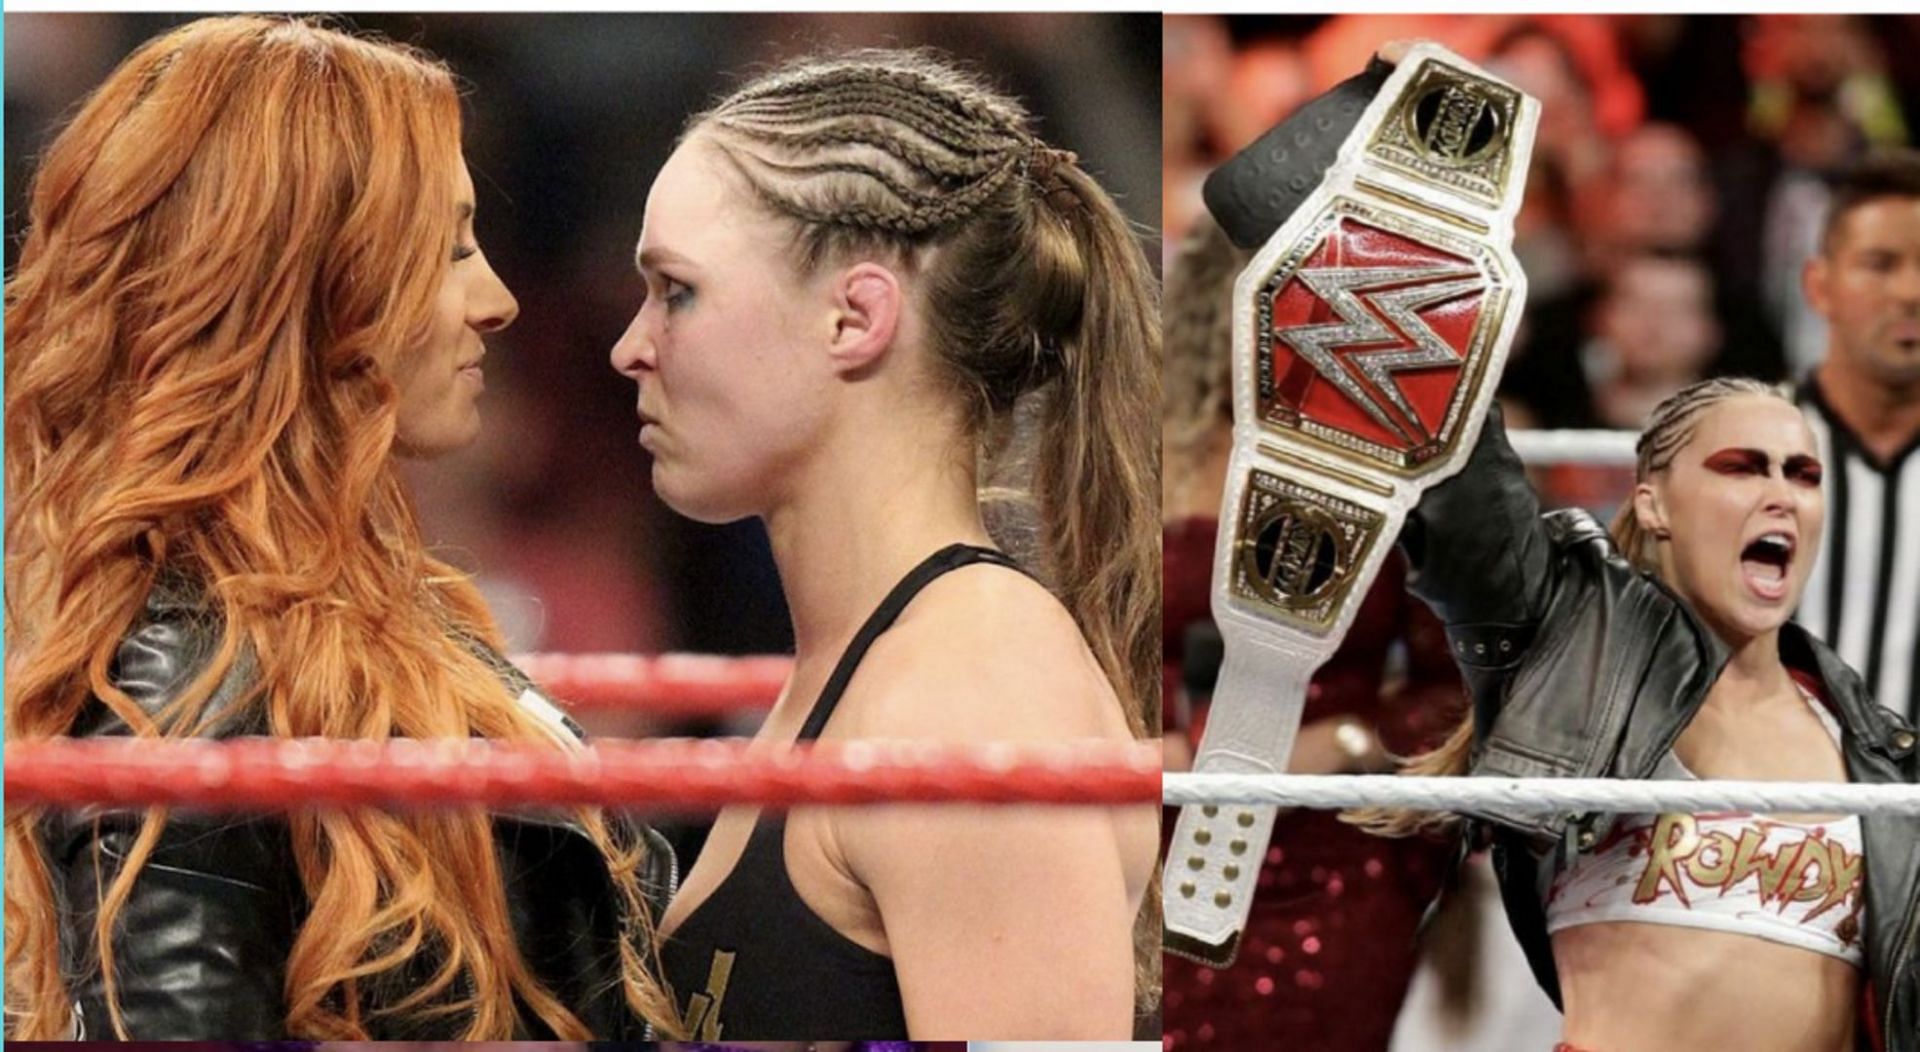 Rousey is already an accomplished WWE Superstar